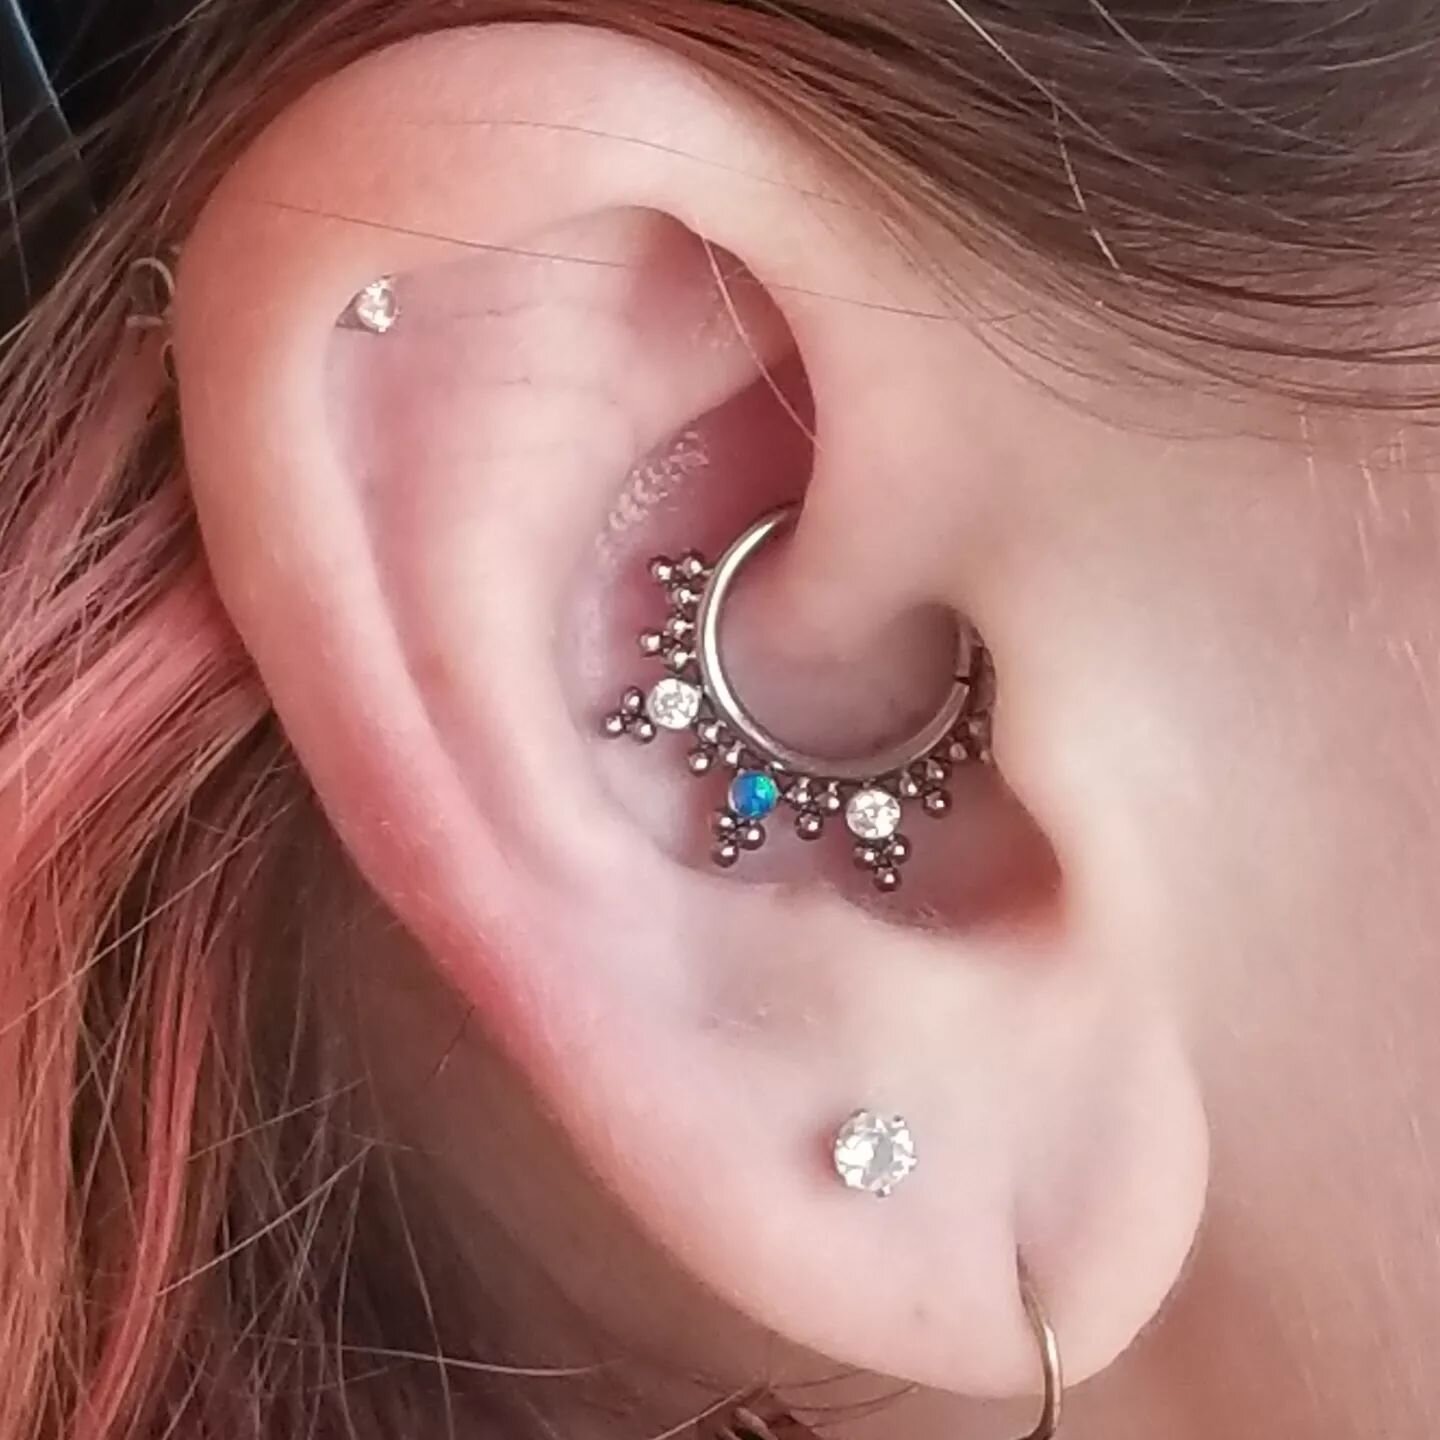 Robert @piercingsbyrobert upgraded the jewelry in this healed daith piercing using a beautiful niobium piece from @leroifinejewellery

#daithpiercing
#daith #jewelryupgrade #bodyjewelry #bodypiercing #legitbodyjewelry #safepiercing #piercings #pierci